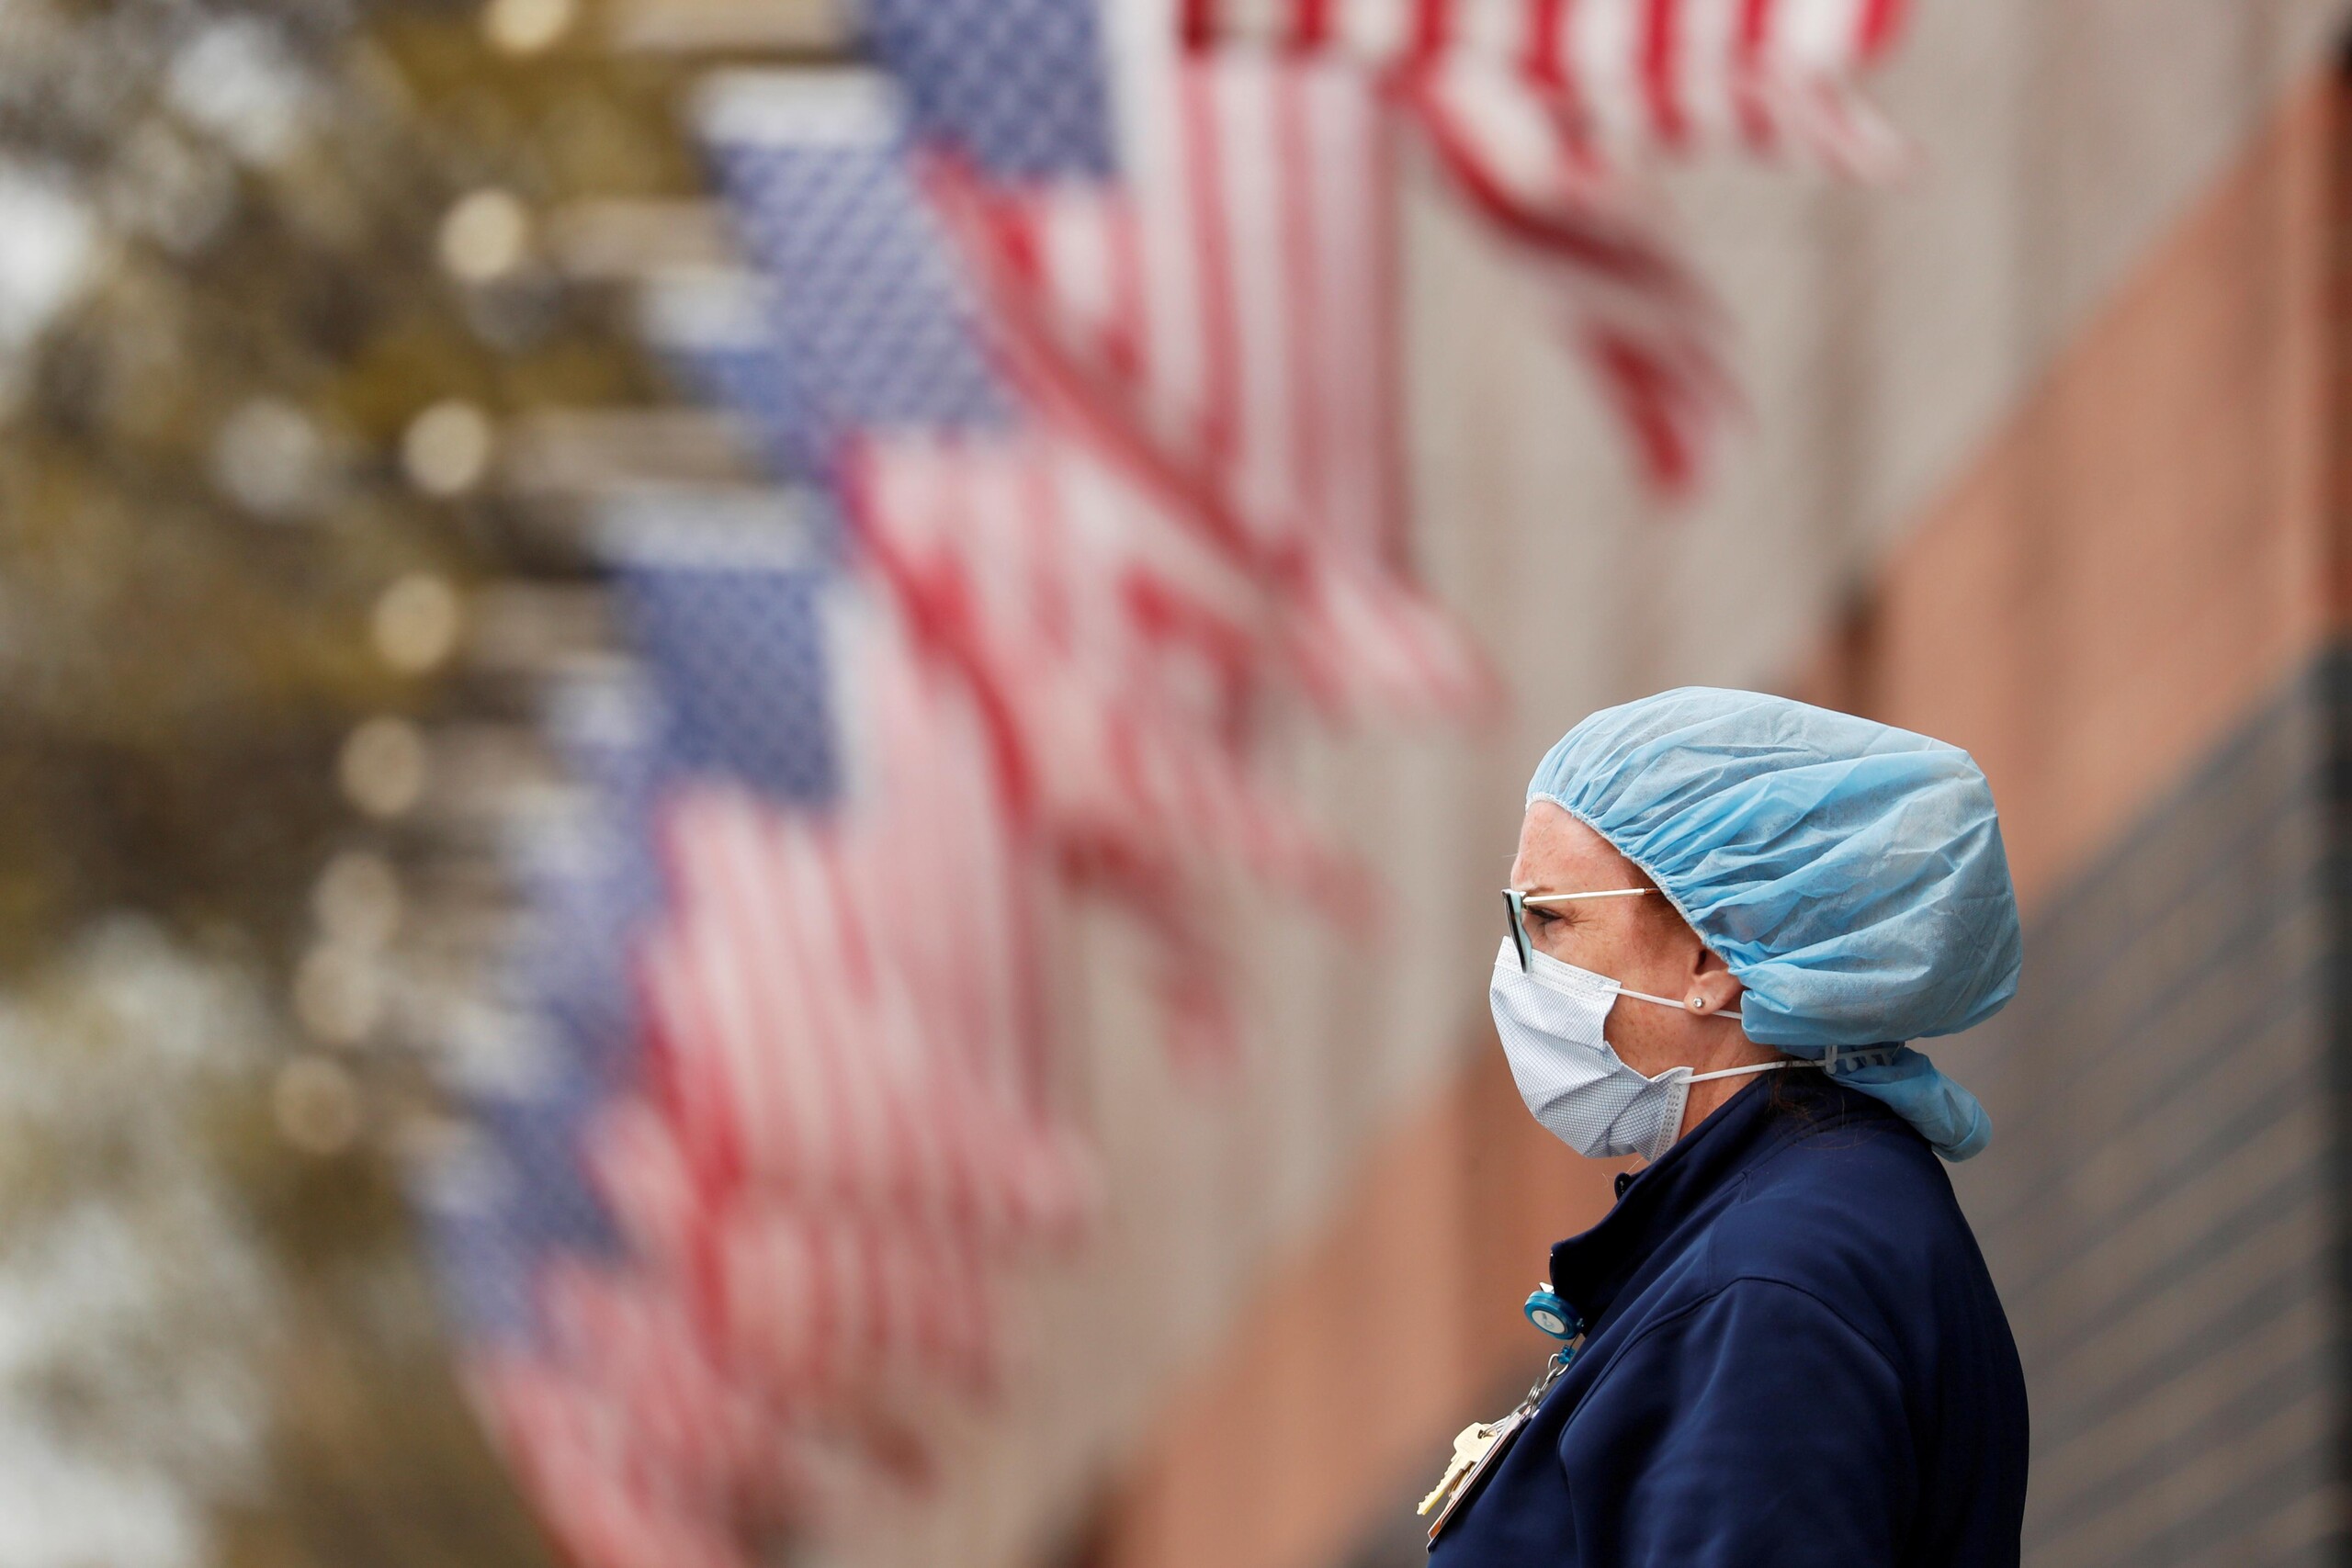 A nurse wearing personal protective equipment watches an ambulance driving away outside of Elmhurst Hospital during the ongoing outbreak of the coronavirus disease (COVID-19) in the Queens borough of New York, U.S., April 20, 2020.